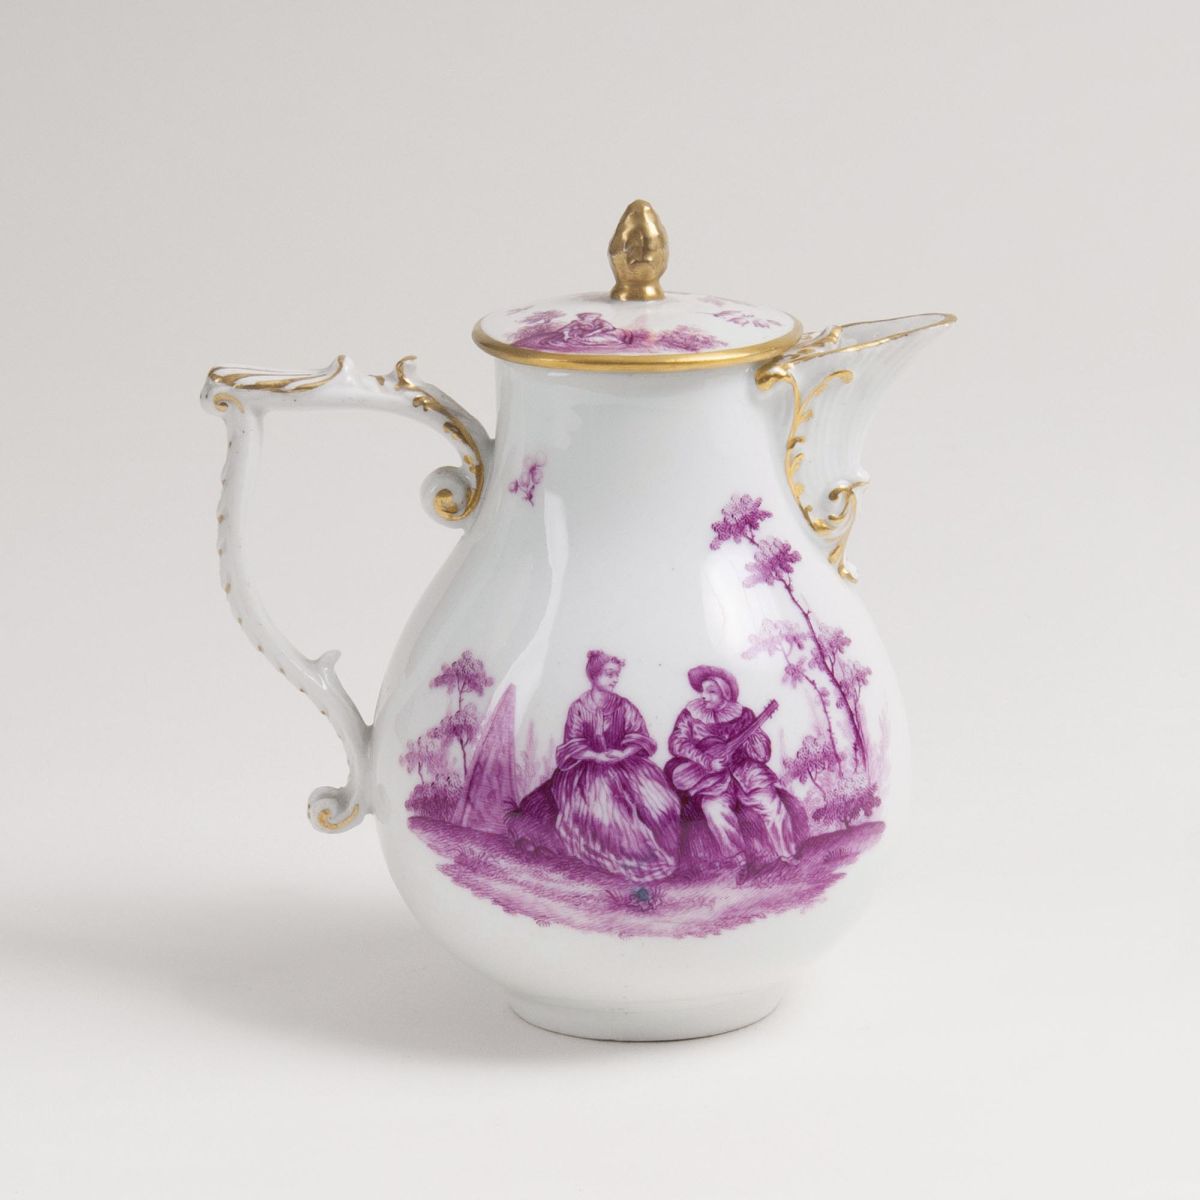 A Small Pot with Watteau Painting in Purple Monochrome